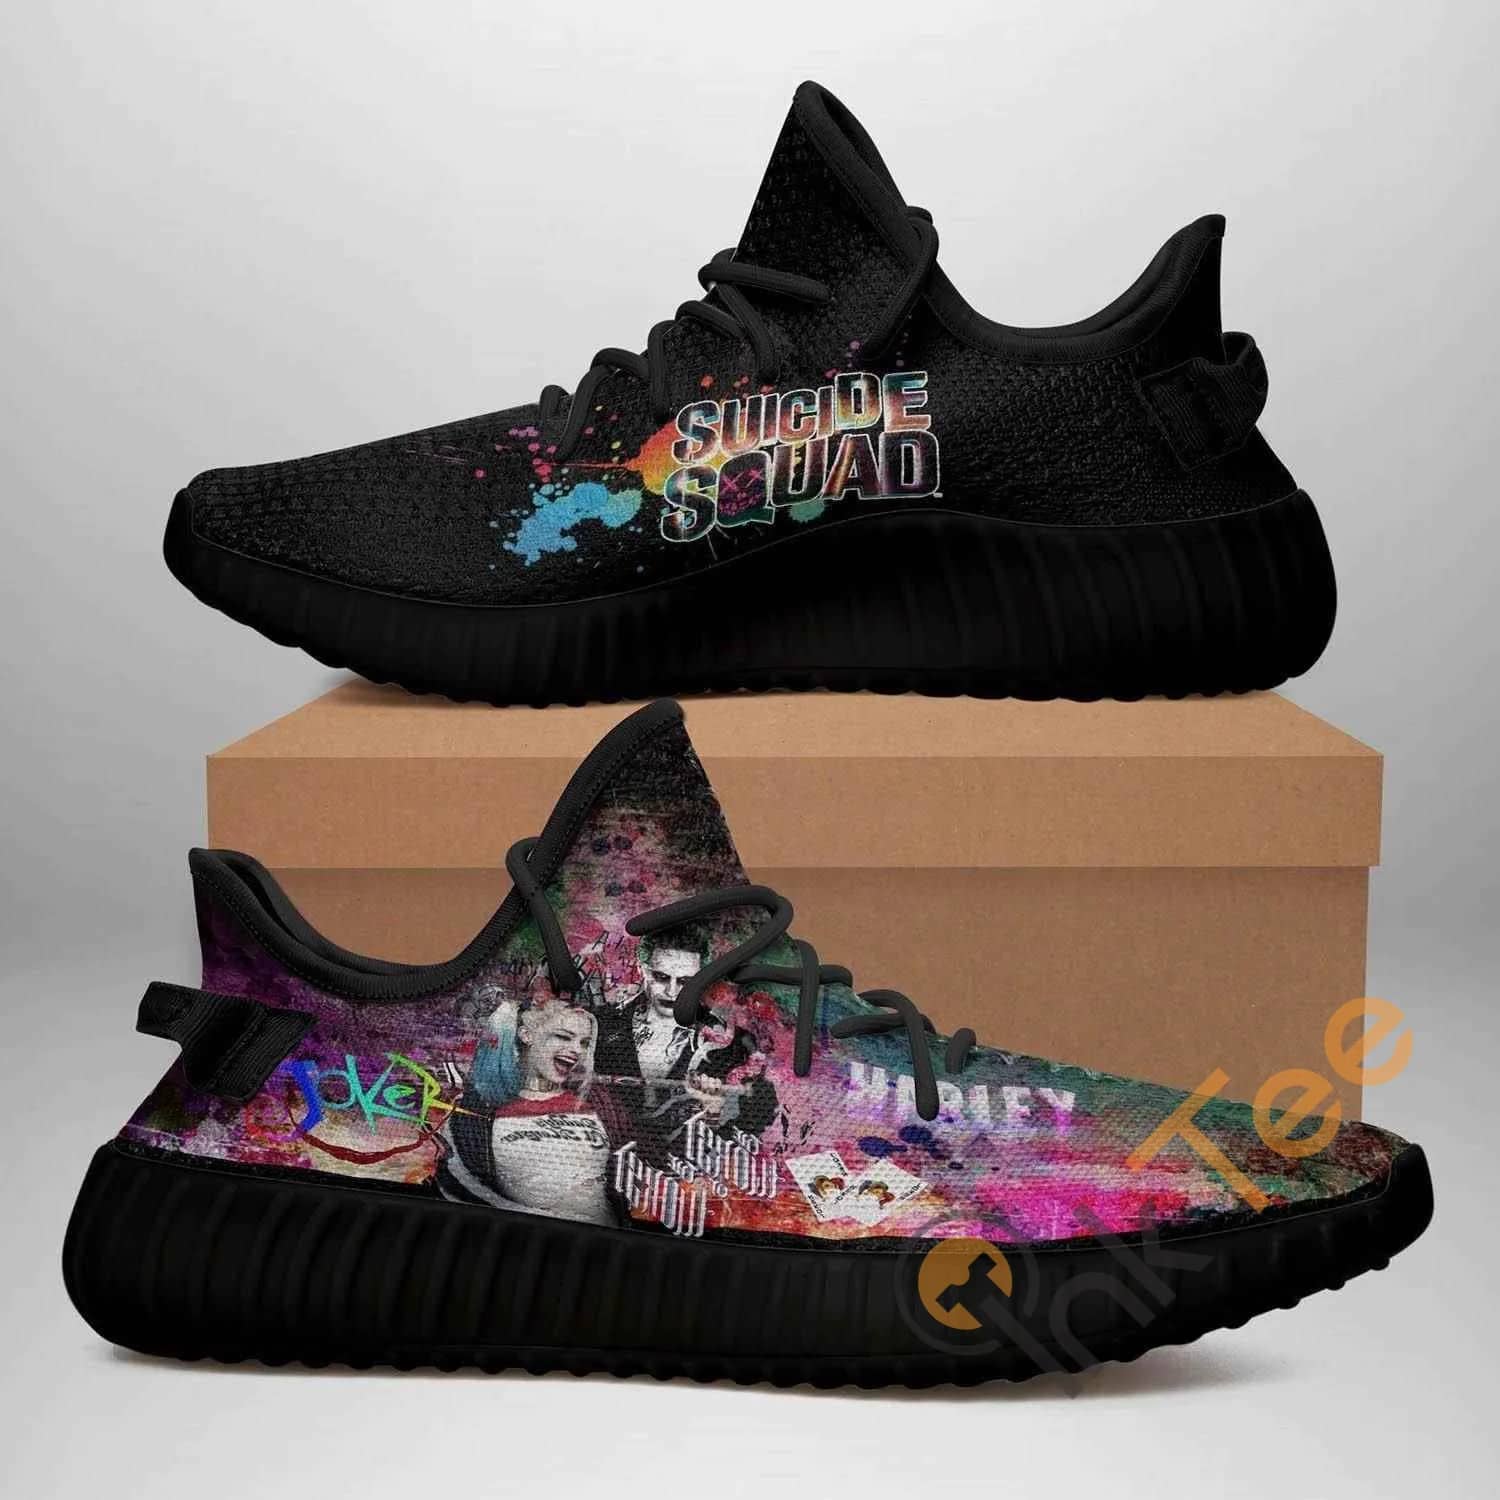 Suicide Squad Amazon Best Selling Yeezy Boost